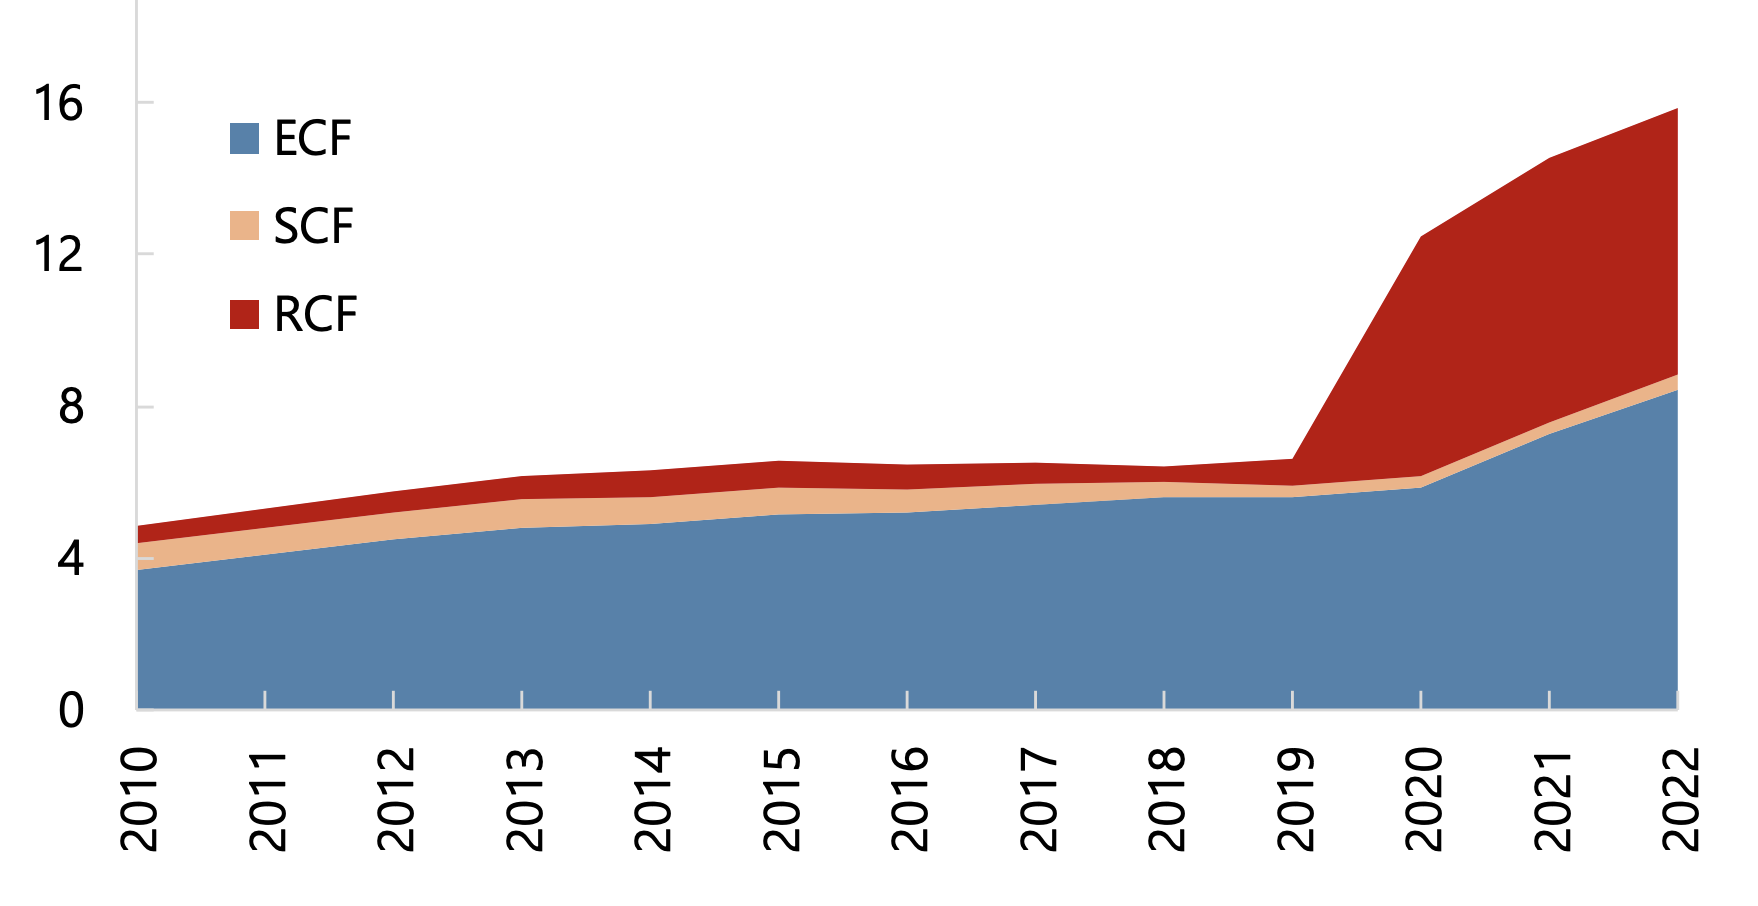 Figure showing the rapid growth in PRGT lending since 2020